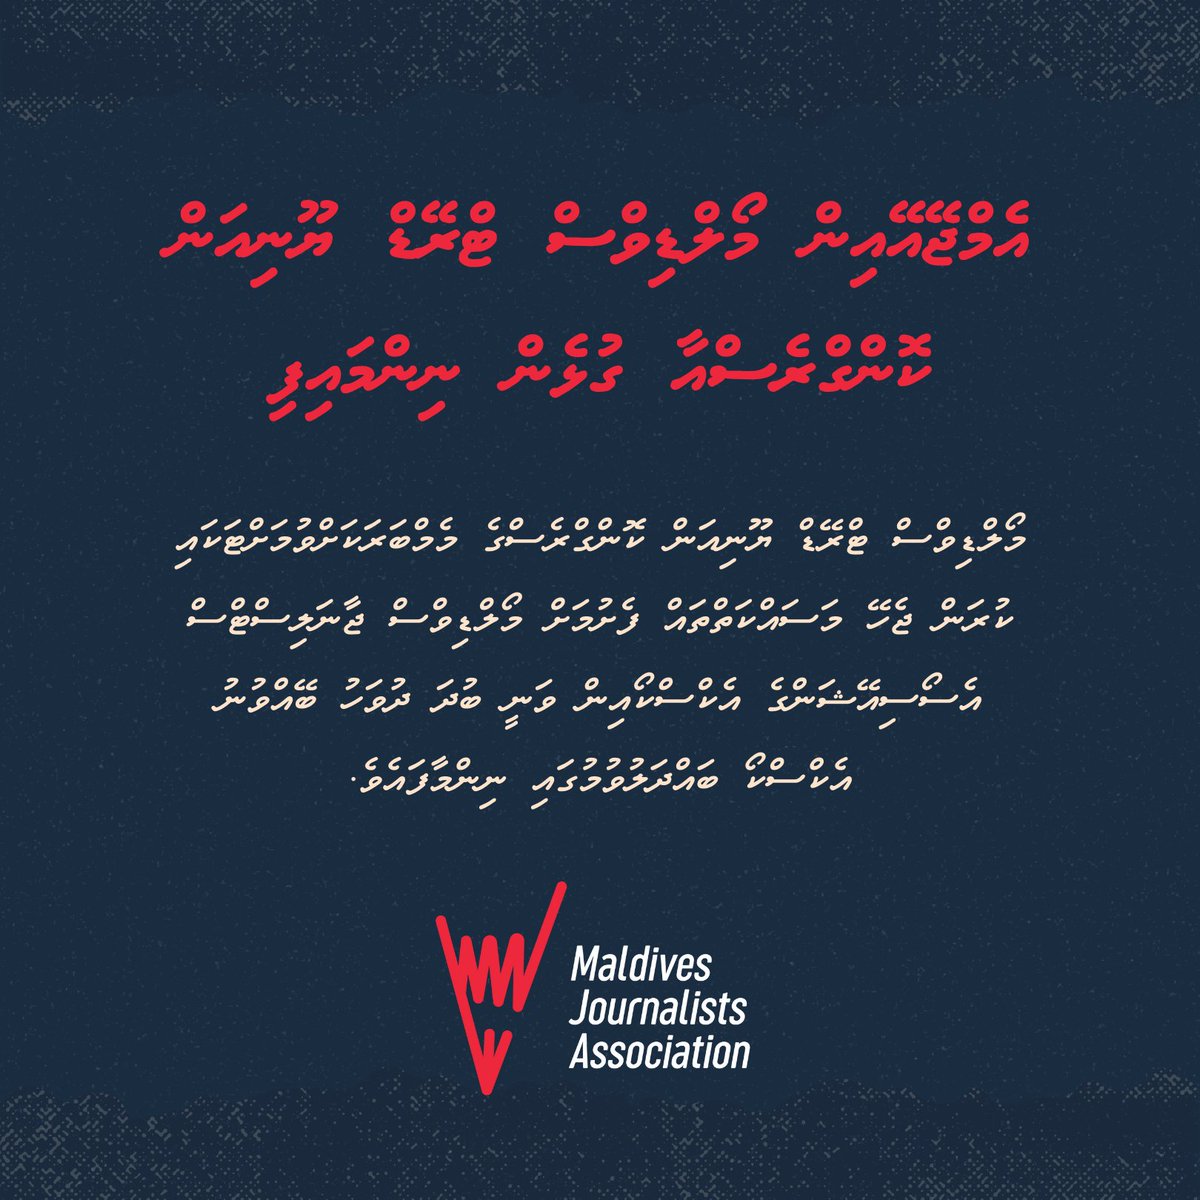 𝙈𝙅𝘼 𝙇𝘼𝙐𝙉𝘾𝙃𝙀𝙎 𝘽𝙄𝘿 𝙏𝙊 𝙅𝙊𝙄𝙉 𝙈𝙏𝙐𝘾 On Wednesday (24 August 2022), the Maldives Journalists Association's ExCom unanimously passed a motion to launch a bid to become a member of the Maldives Trade Union Congress. ✊🏾✊🏾✊🏾